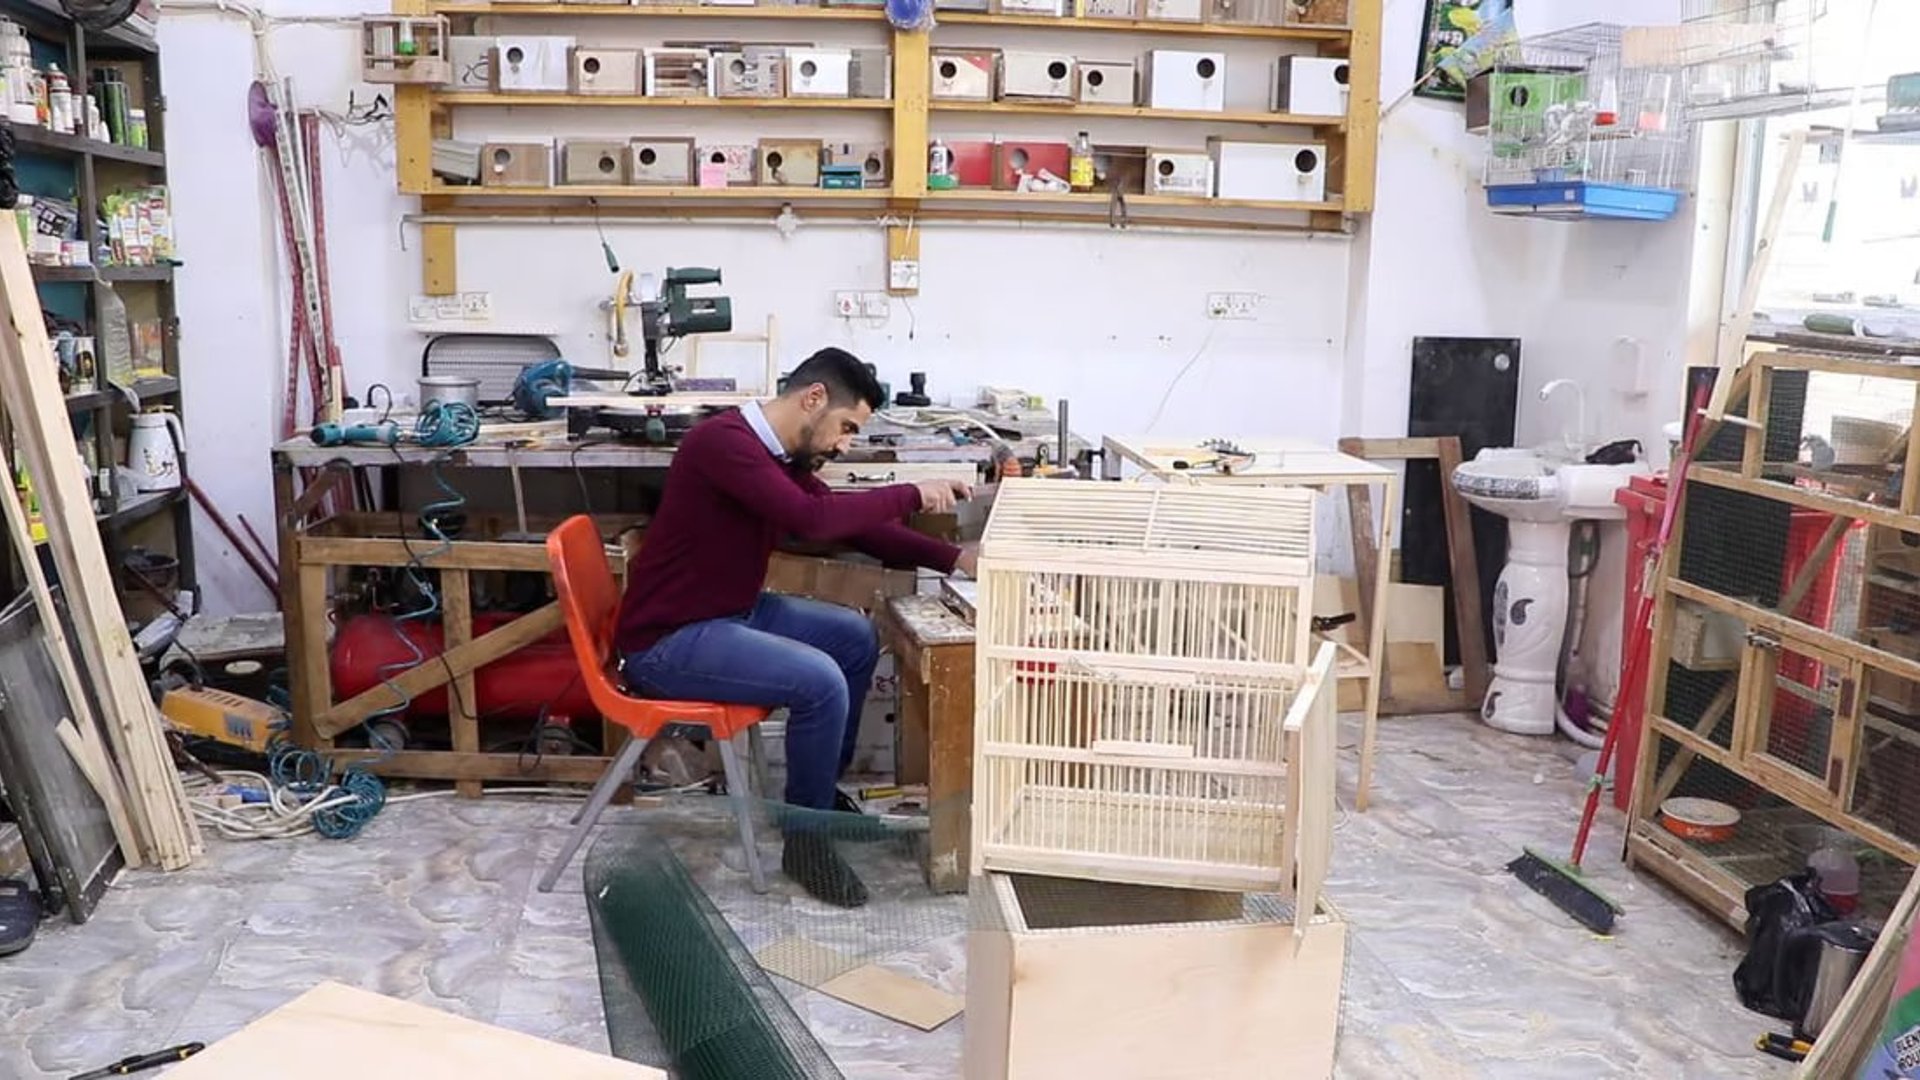 AlKut bird sellers innovate with bespoke bird cages